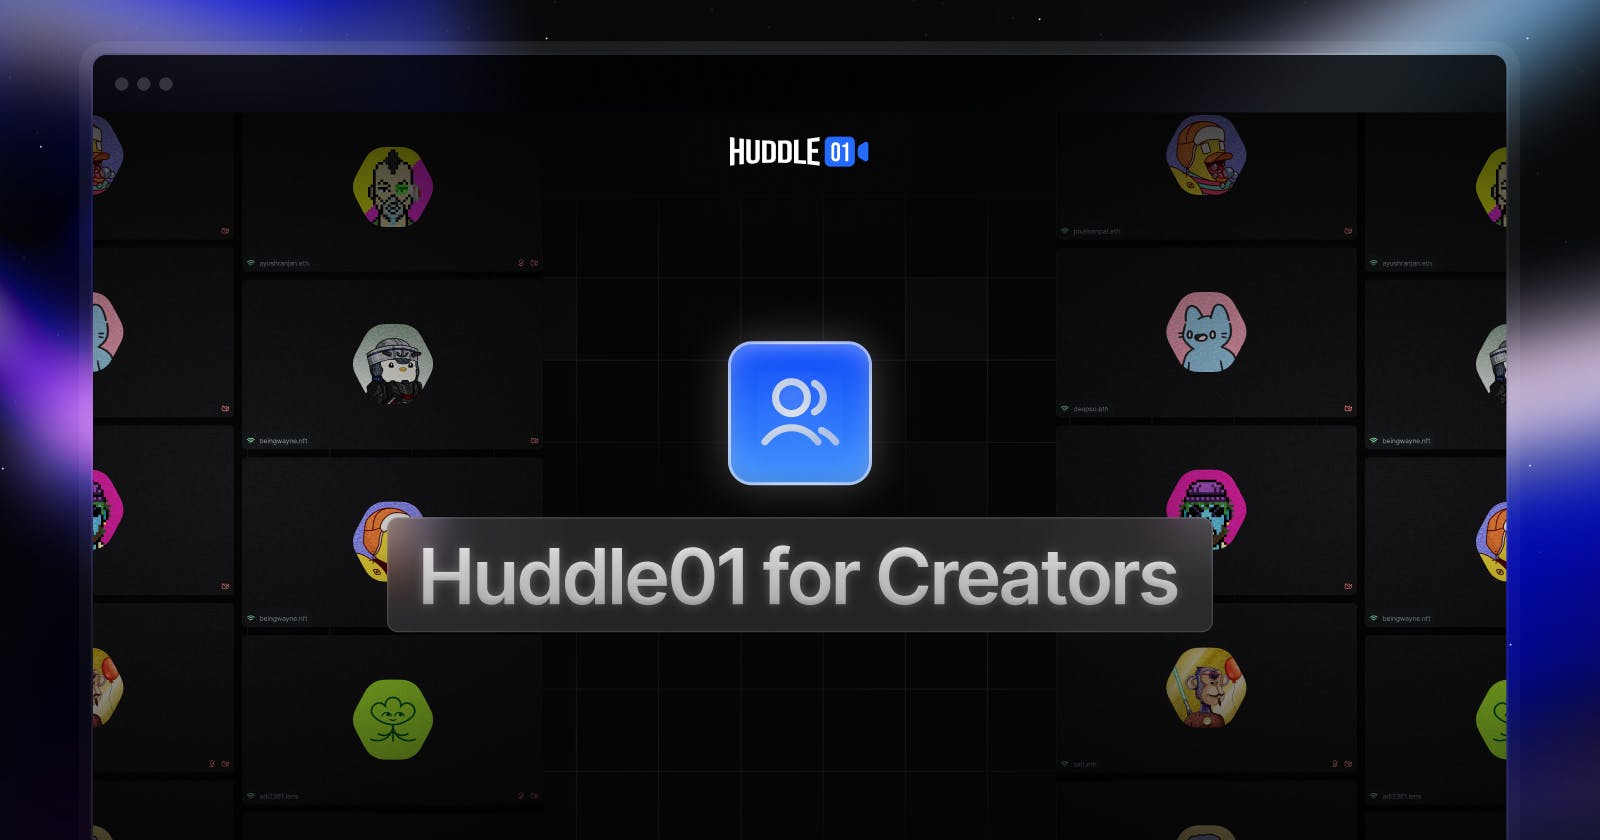 Power up your content and community with Huddle01 for Creators 📹 👥